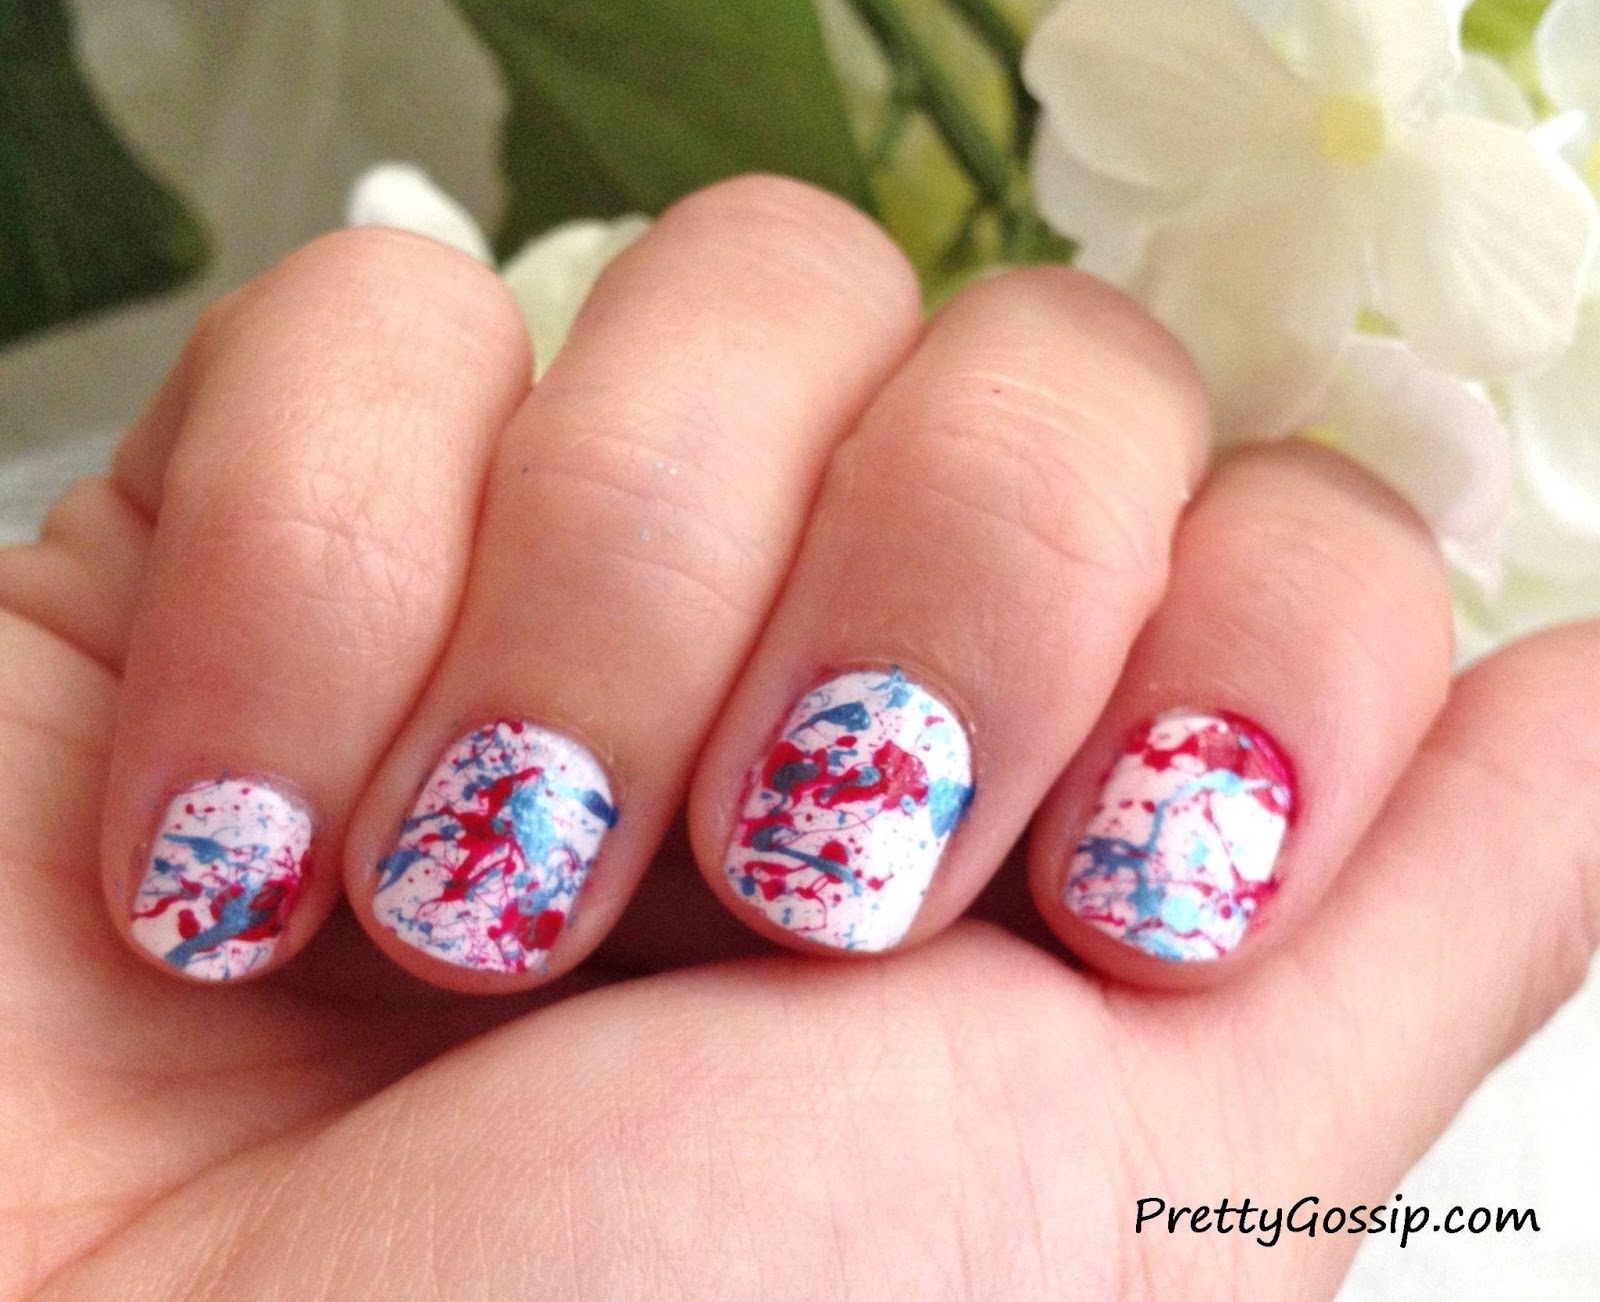 Easy DIY July 4th Nail Designs Using Red, White, and Blue Polish - wide 5